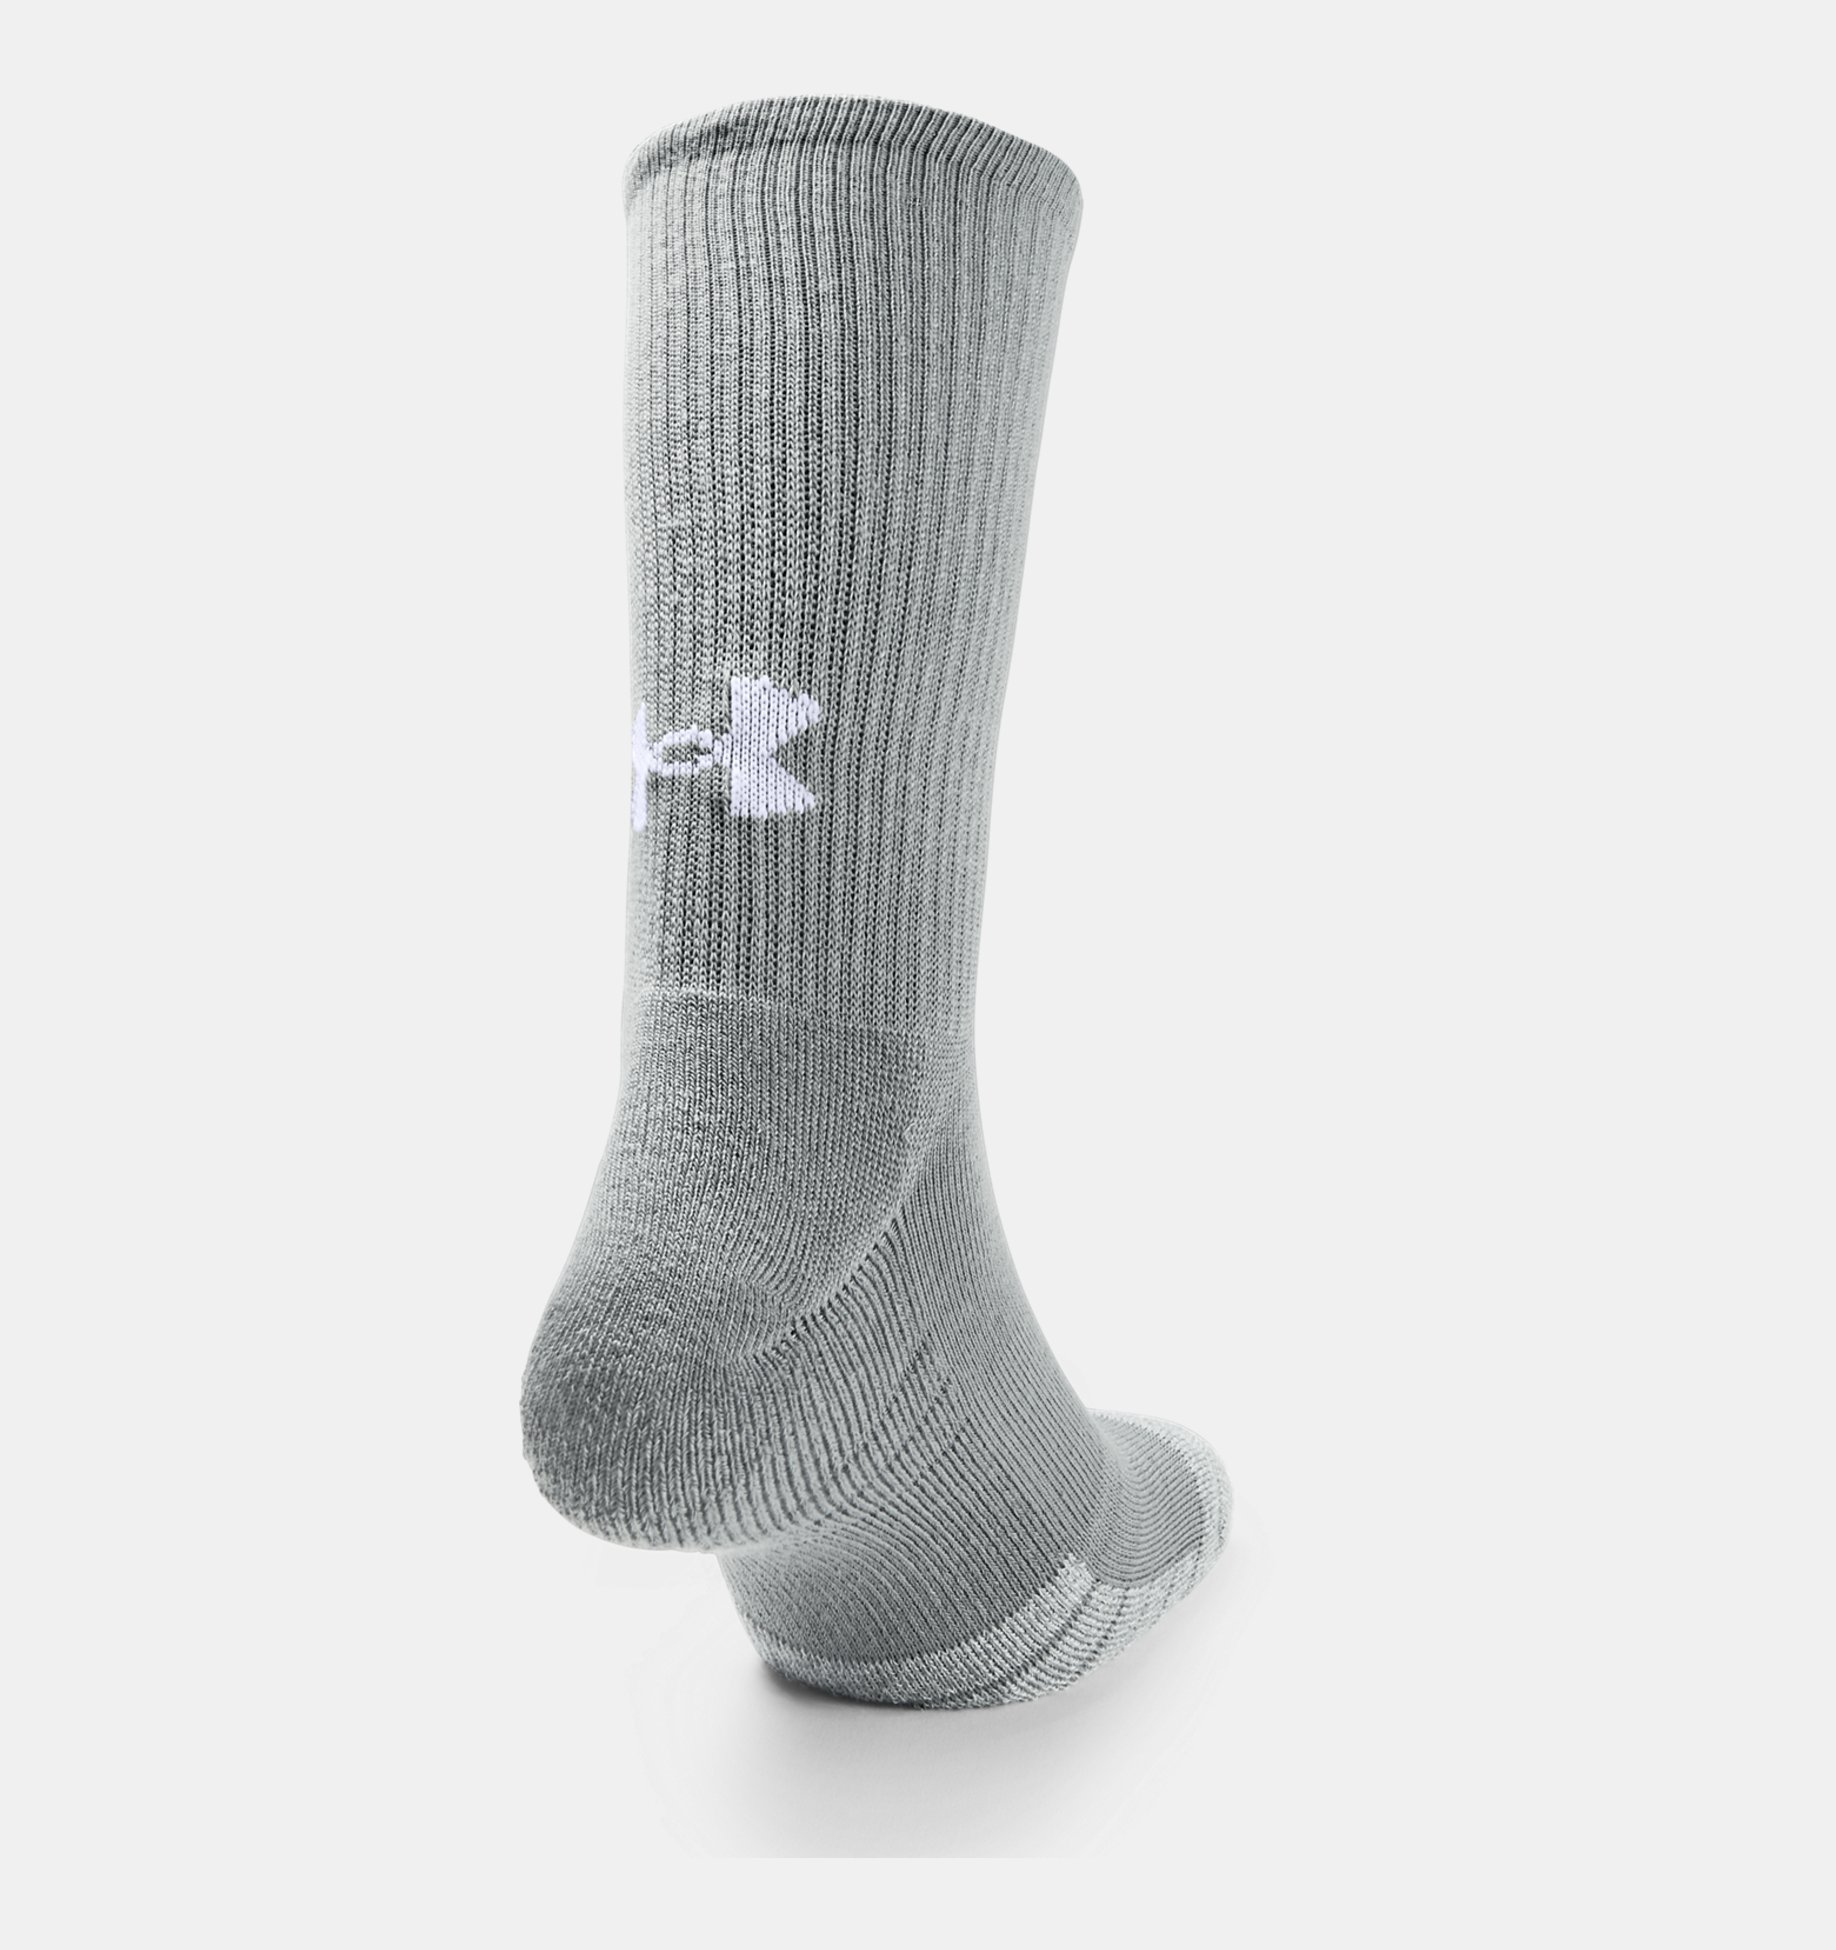 Details about   Under Armour Adult Heatgear Tech Crew Socks 3-Pairs 